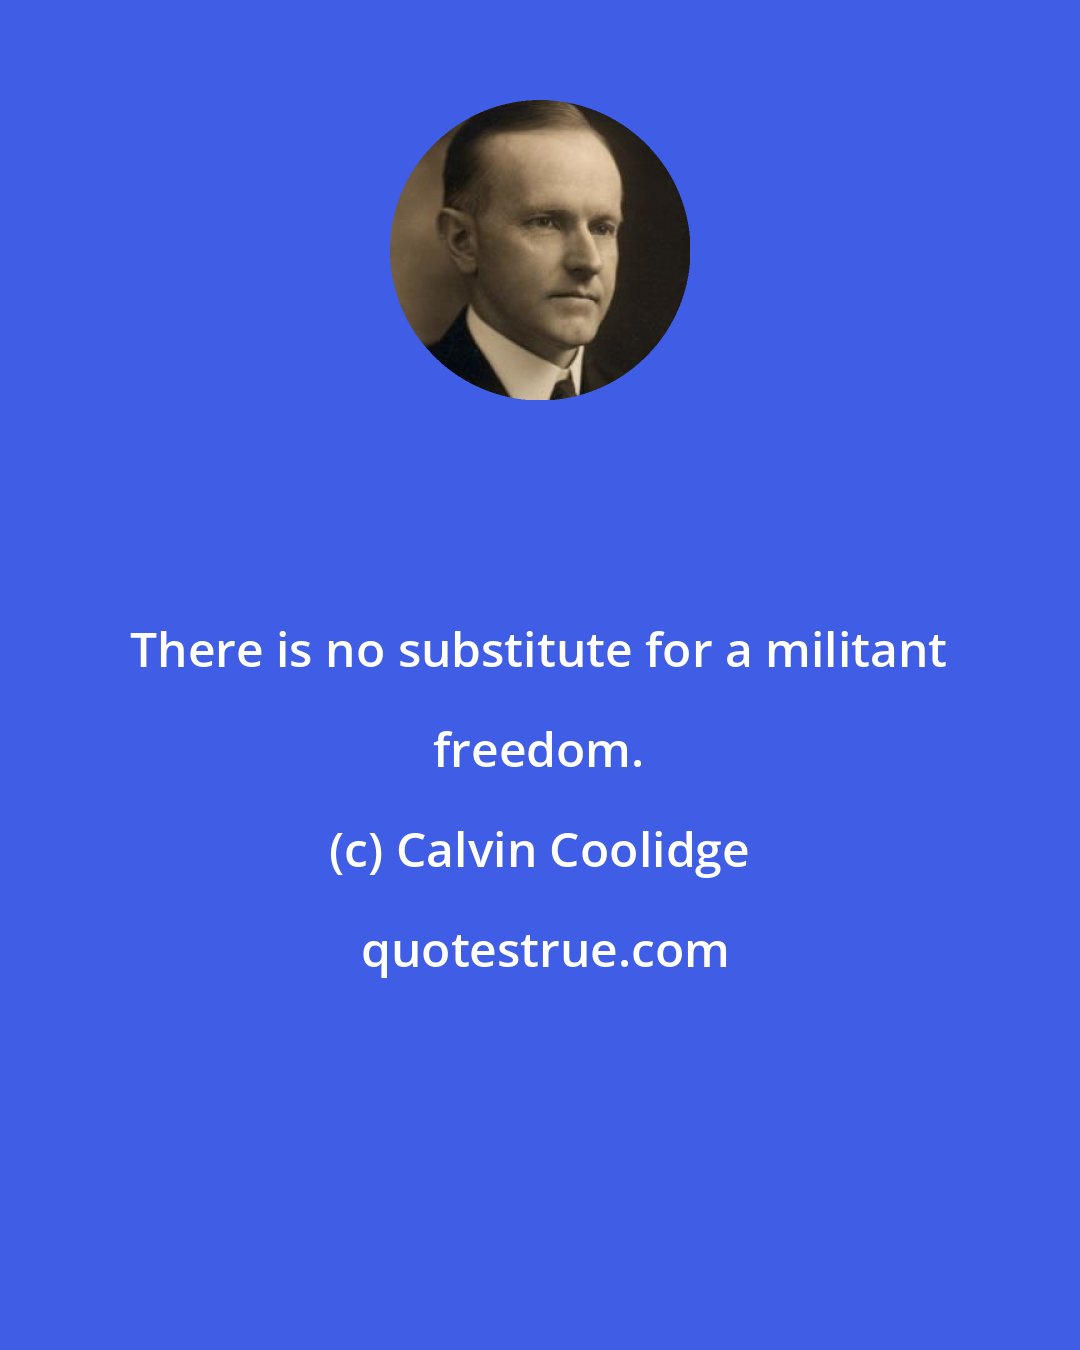 Calvin Coolidge: There is no substitute for a militant freedom.